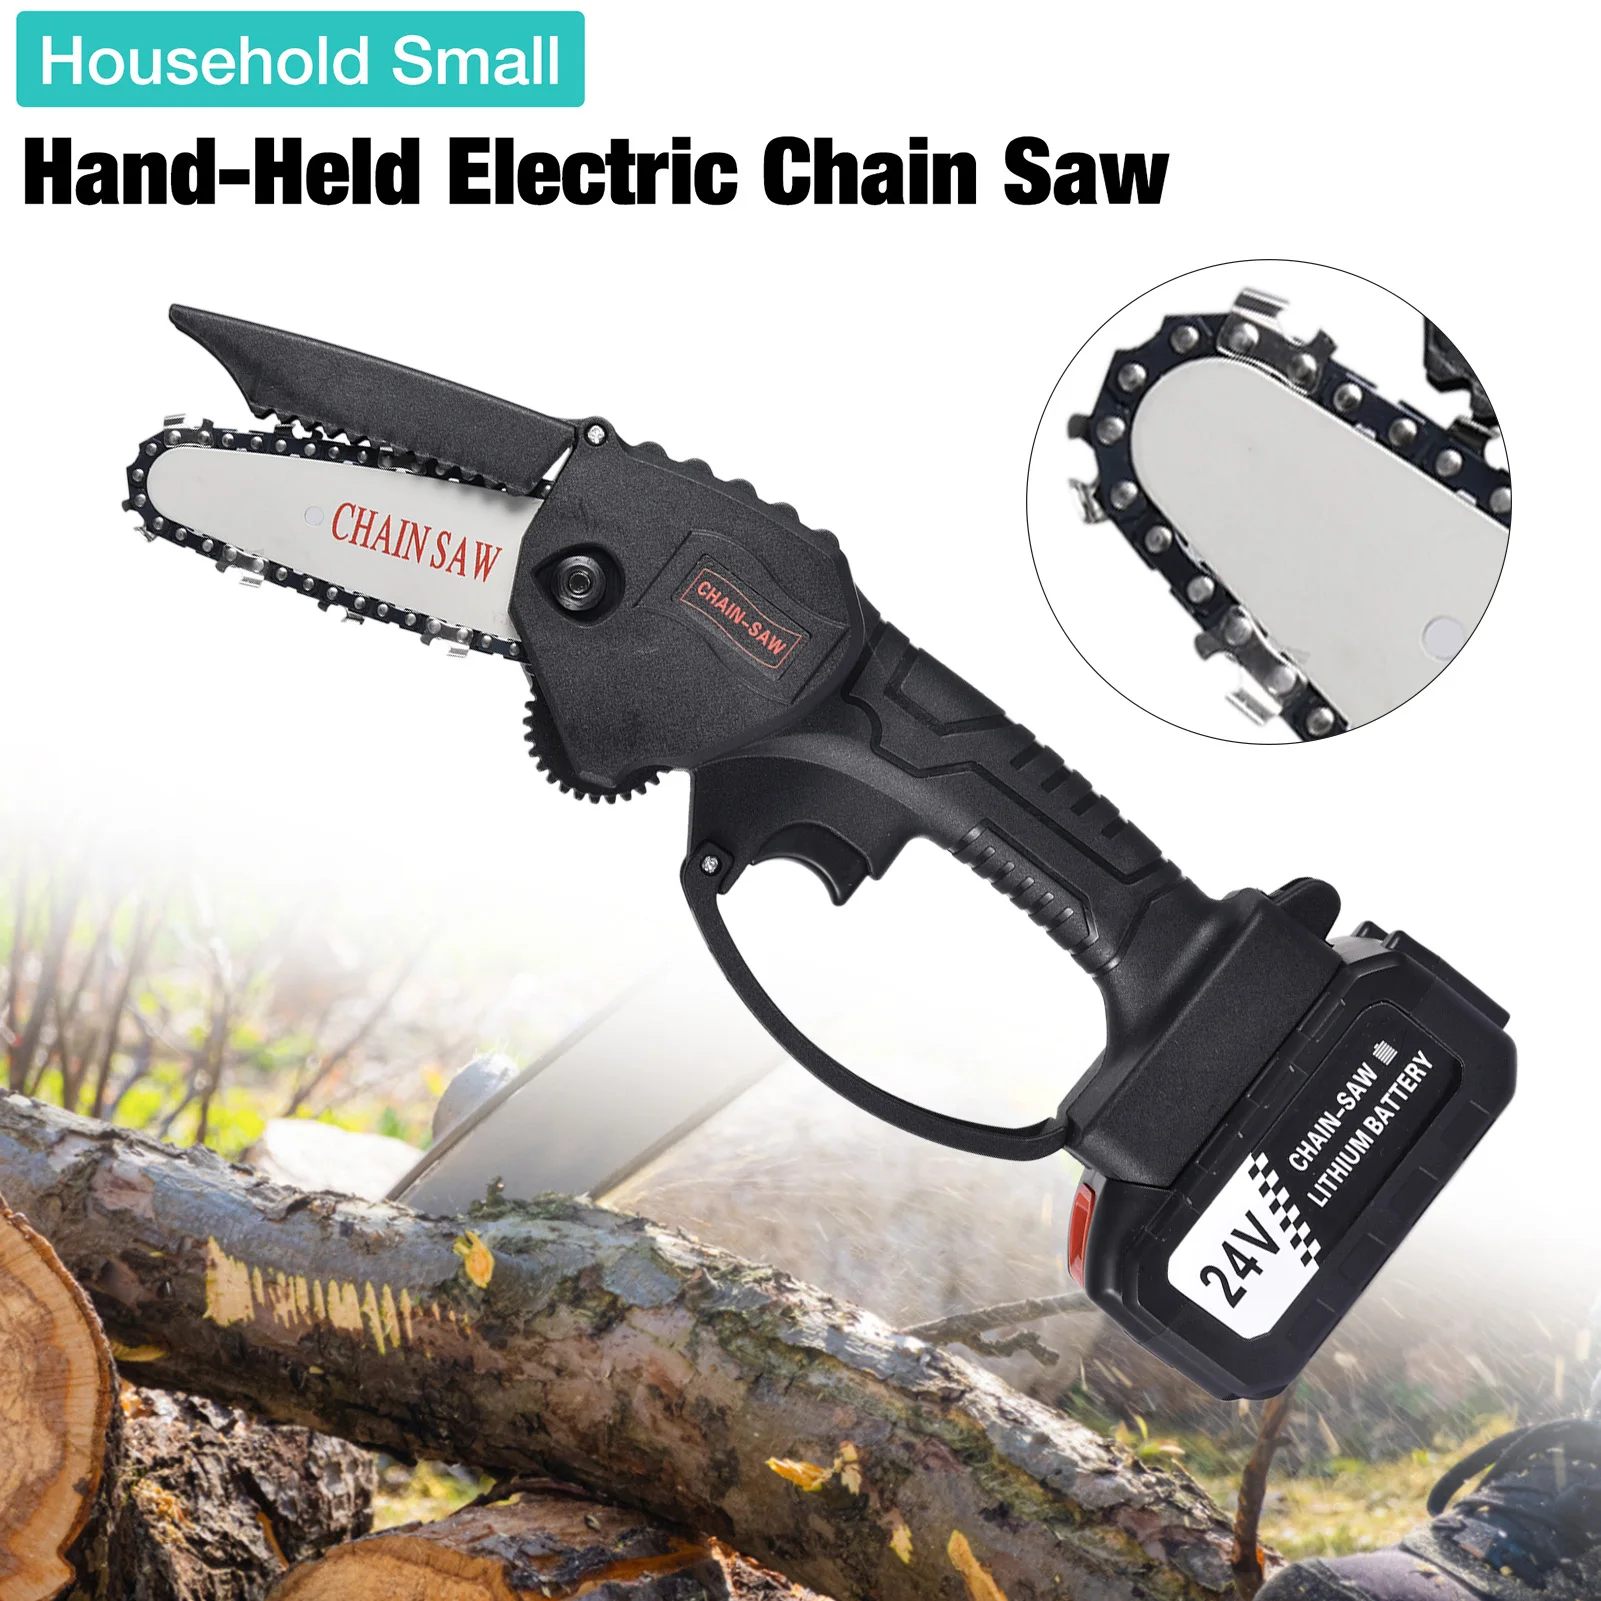 Mini Chainsaw Rechargeable Hand-held Electric Pruning Saw Tool Chain Saw Part Angle Grinder Into Chain Saw